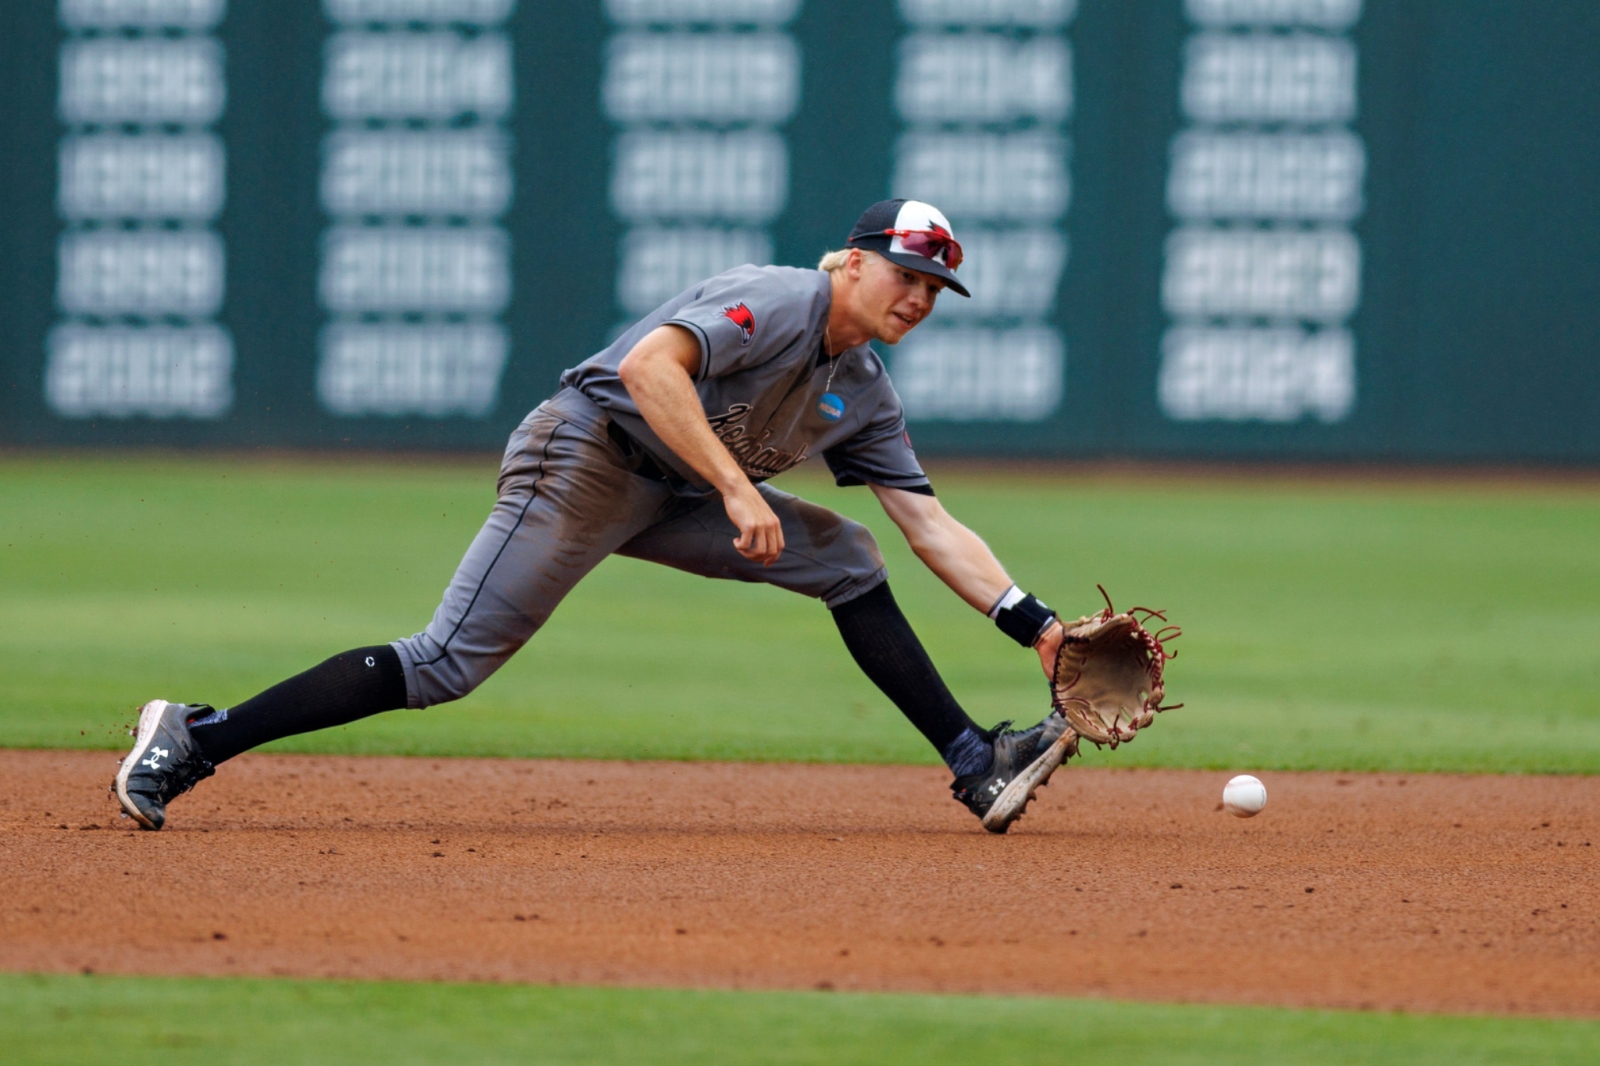 Brooks Kettering, wearing a Southeast Missouri State baseball uniform, stretches to his left to catch a ground ball during a baseball game at Baum-Walker Stadium in Fayetteville, Arkansas.